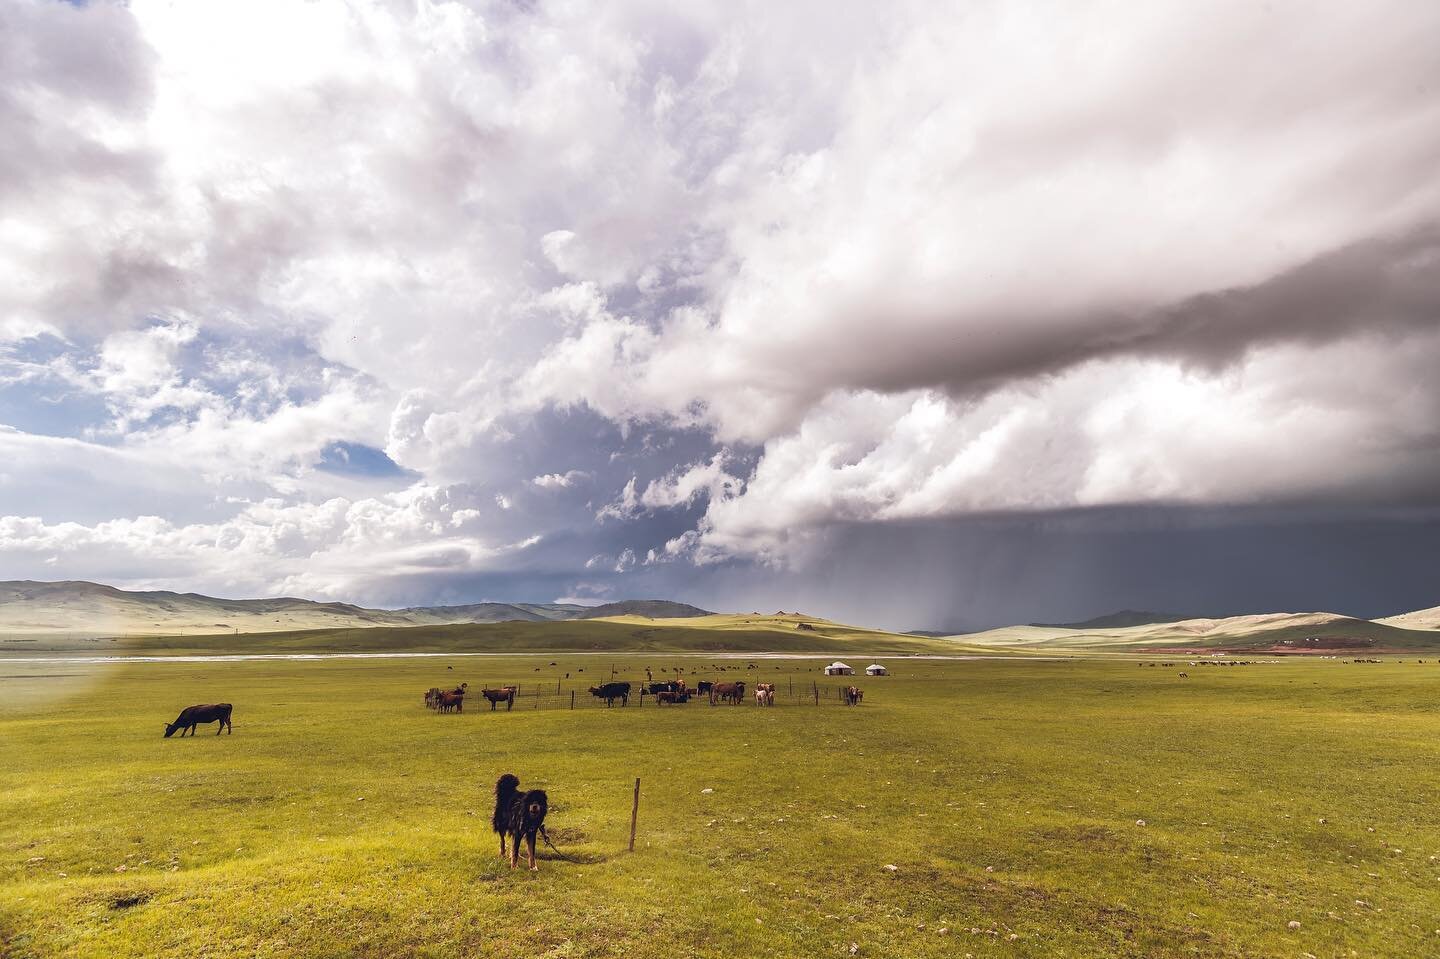 At first glance you may consider this a boring image. But once you start to look closer, you will soon begin to realise that this is Mongolia summed up in a moment. The vast open Steppe. Gorgeous blue skies, raging storms. A savage snarling, barking 